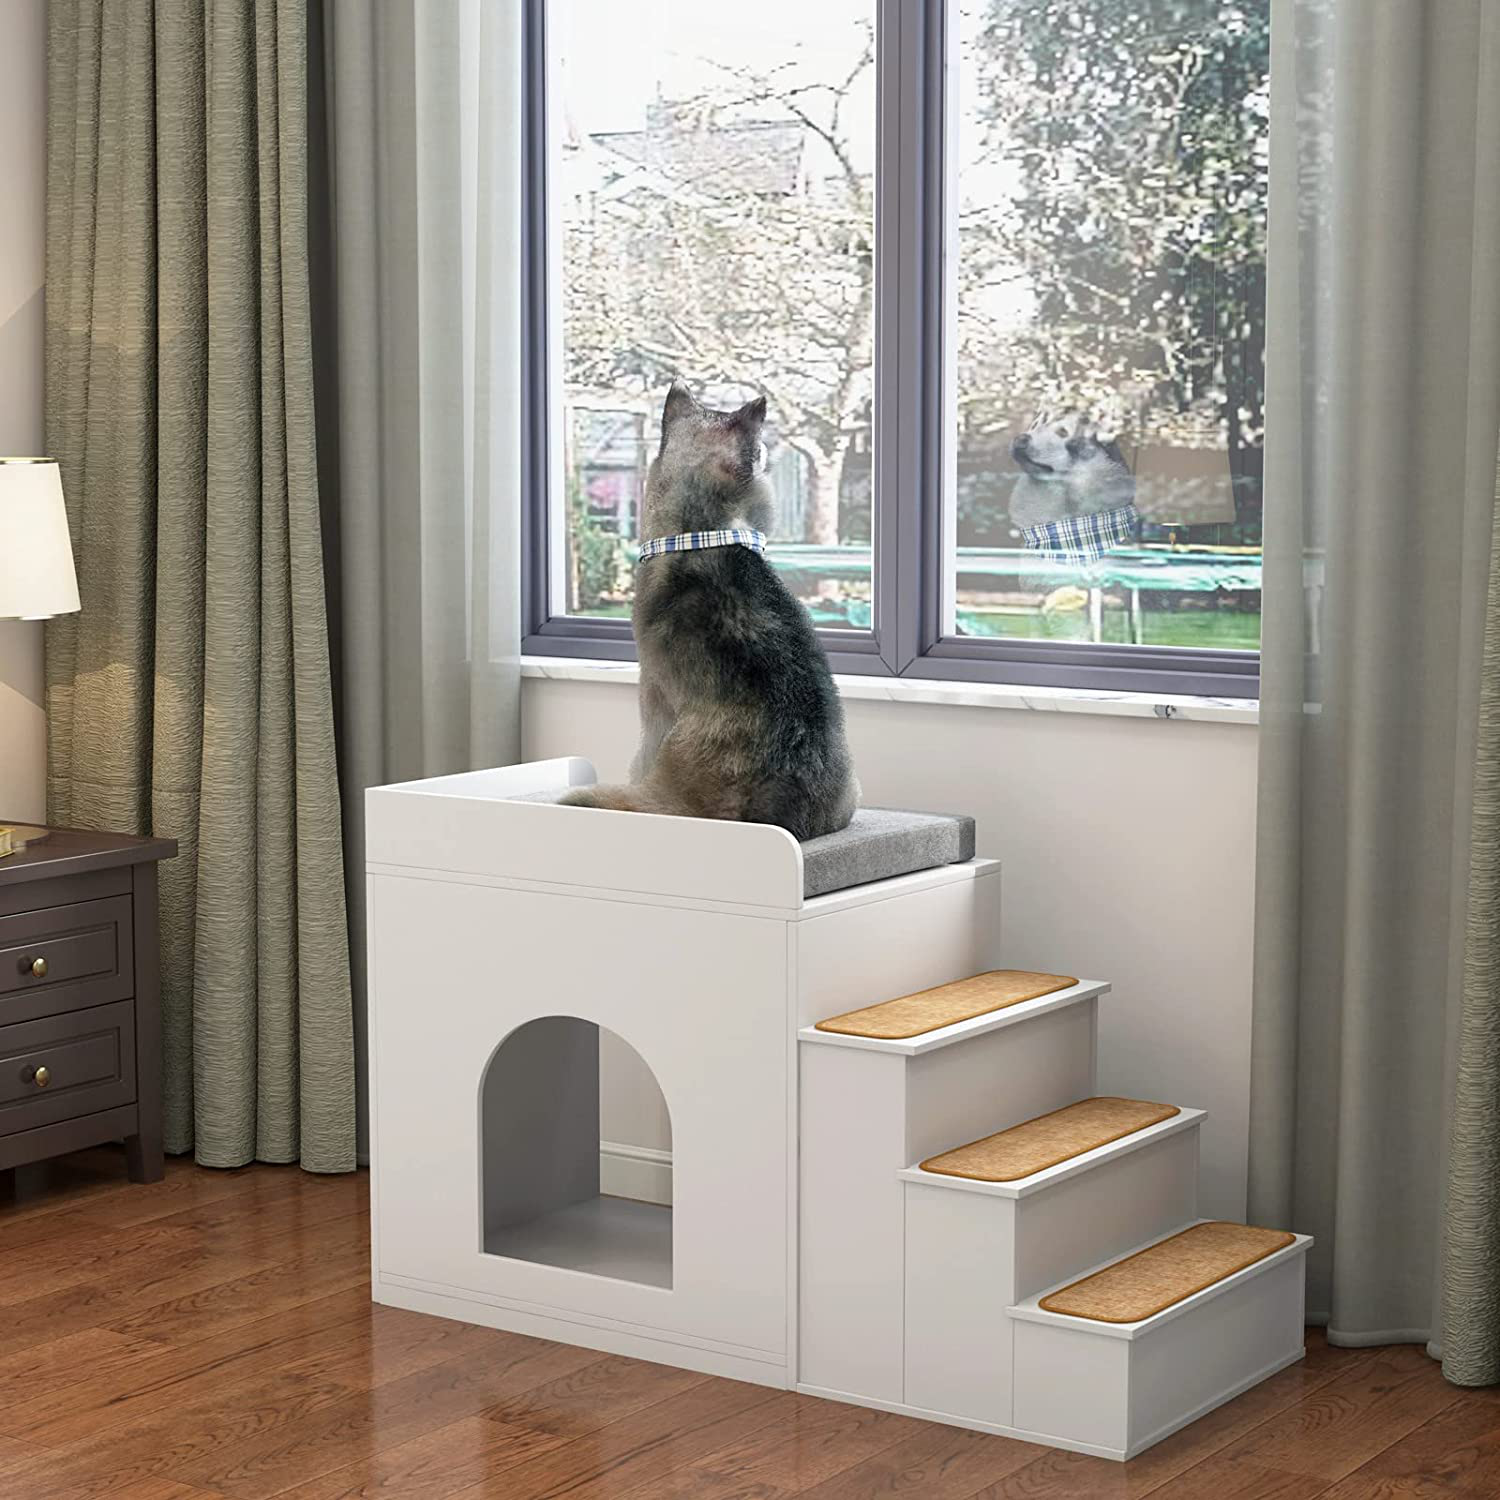 Multifunction Indoor Dog Pet Multi-Level Bed Window Perch Seat Platform Wood Stairs Bunk Bed Condo for Dog Cats 24" H White